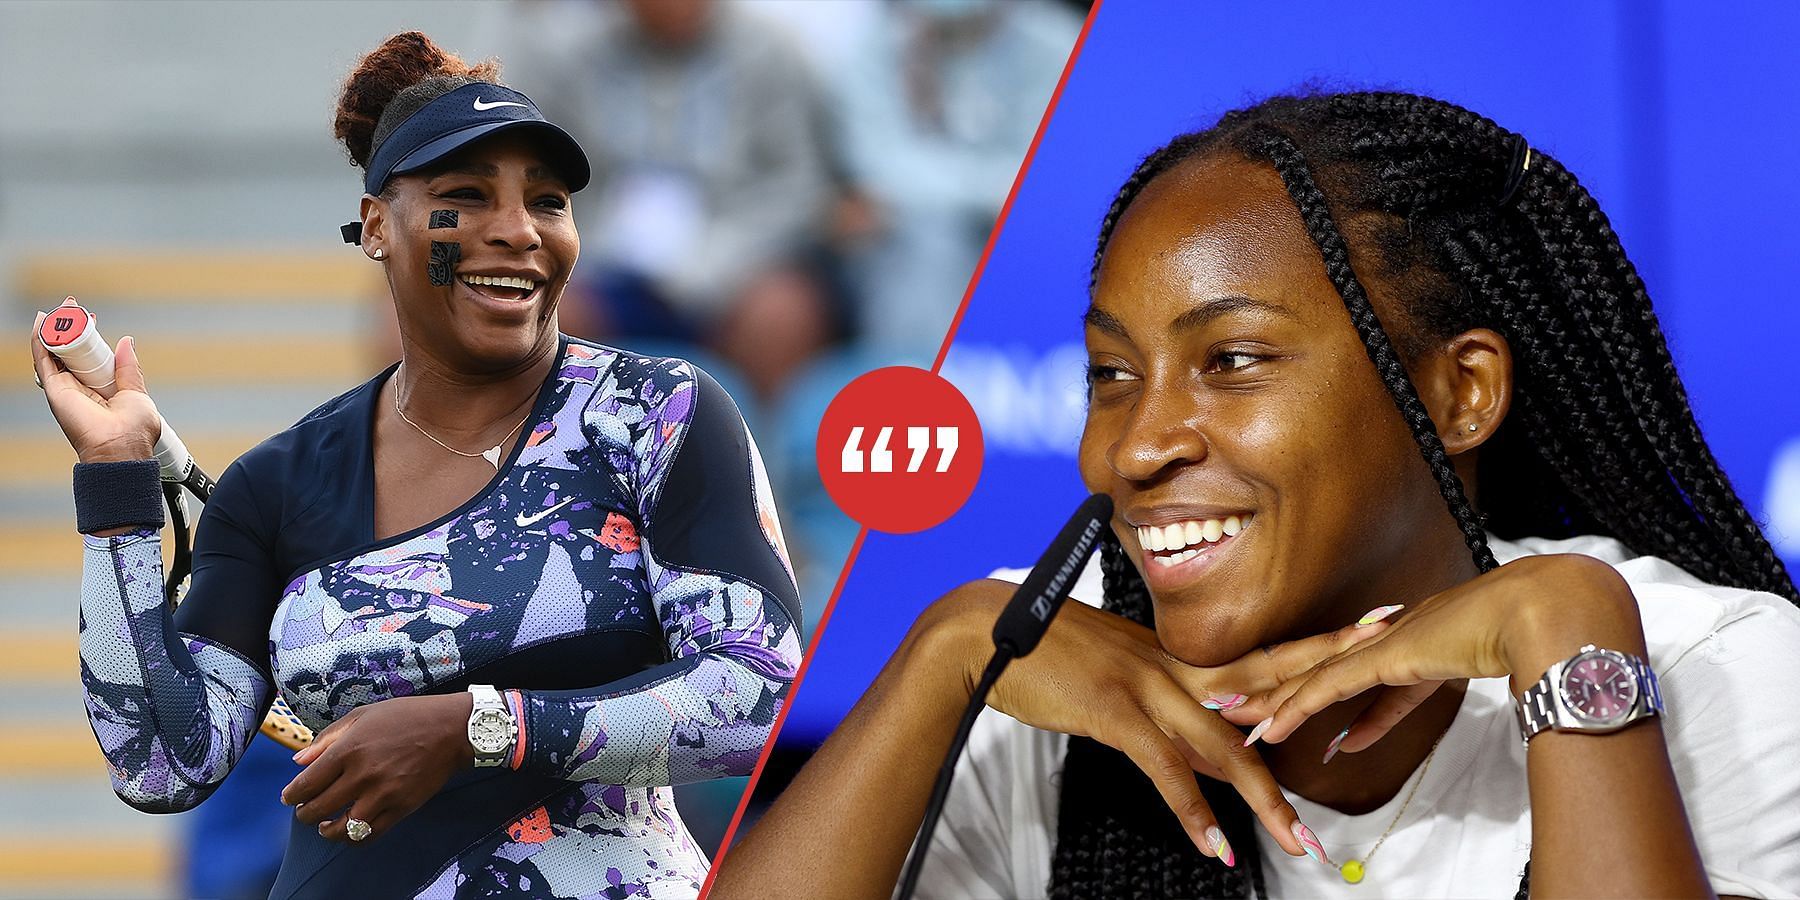 Coco Gauff spoke about looking up to Serena Williams